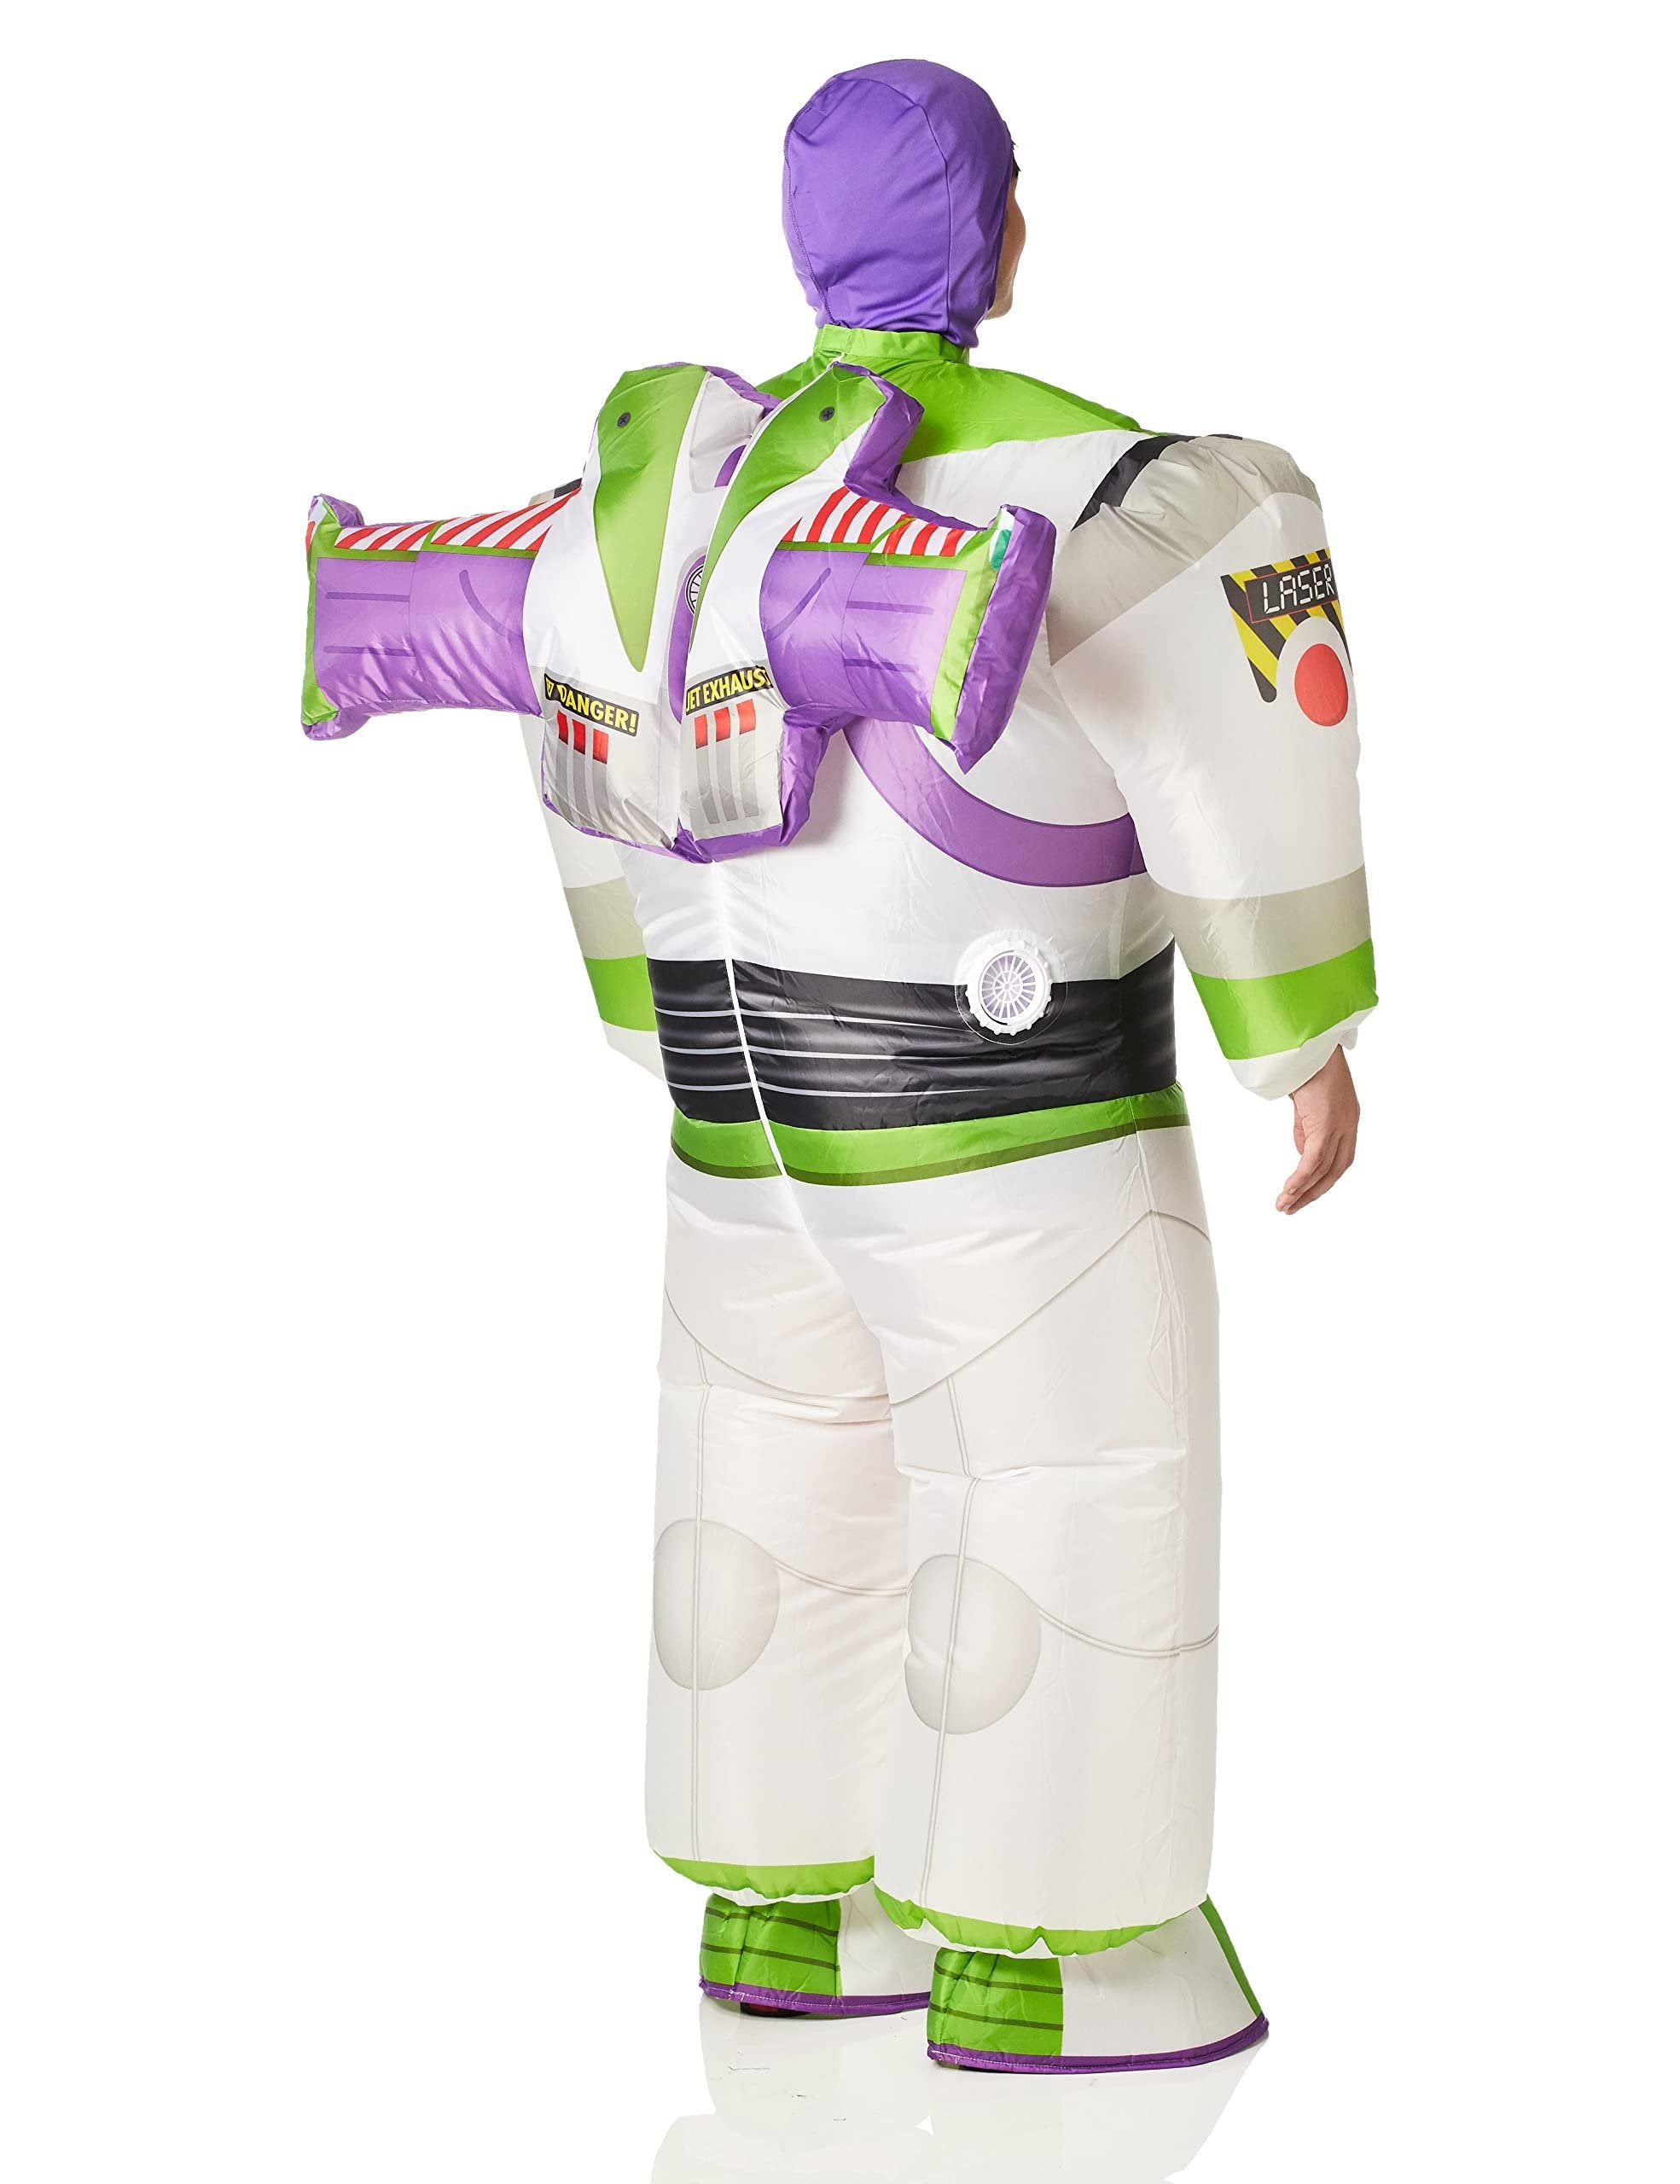 Disguise Buzz Lightyear Inflatable Costume - White, One Size Adult - Free Shipping & Returns